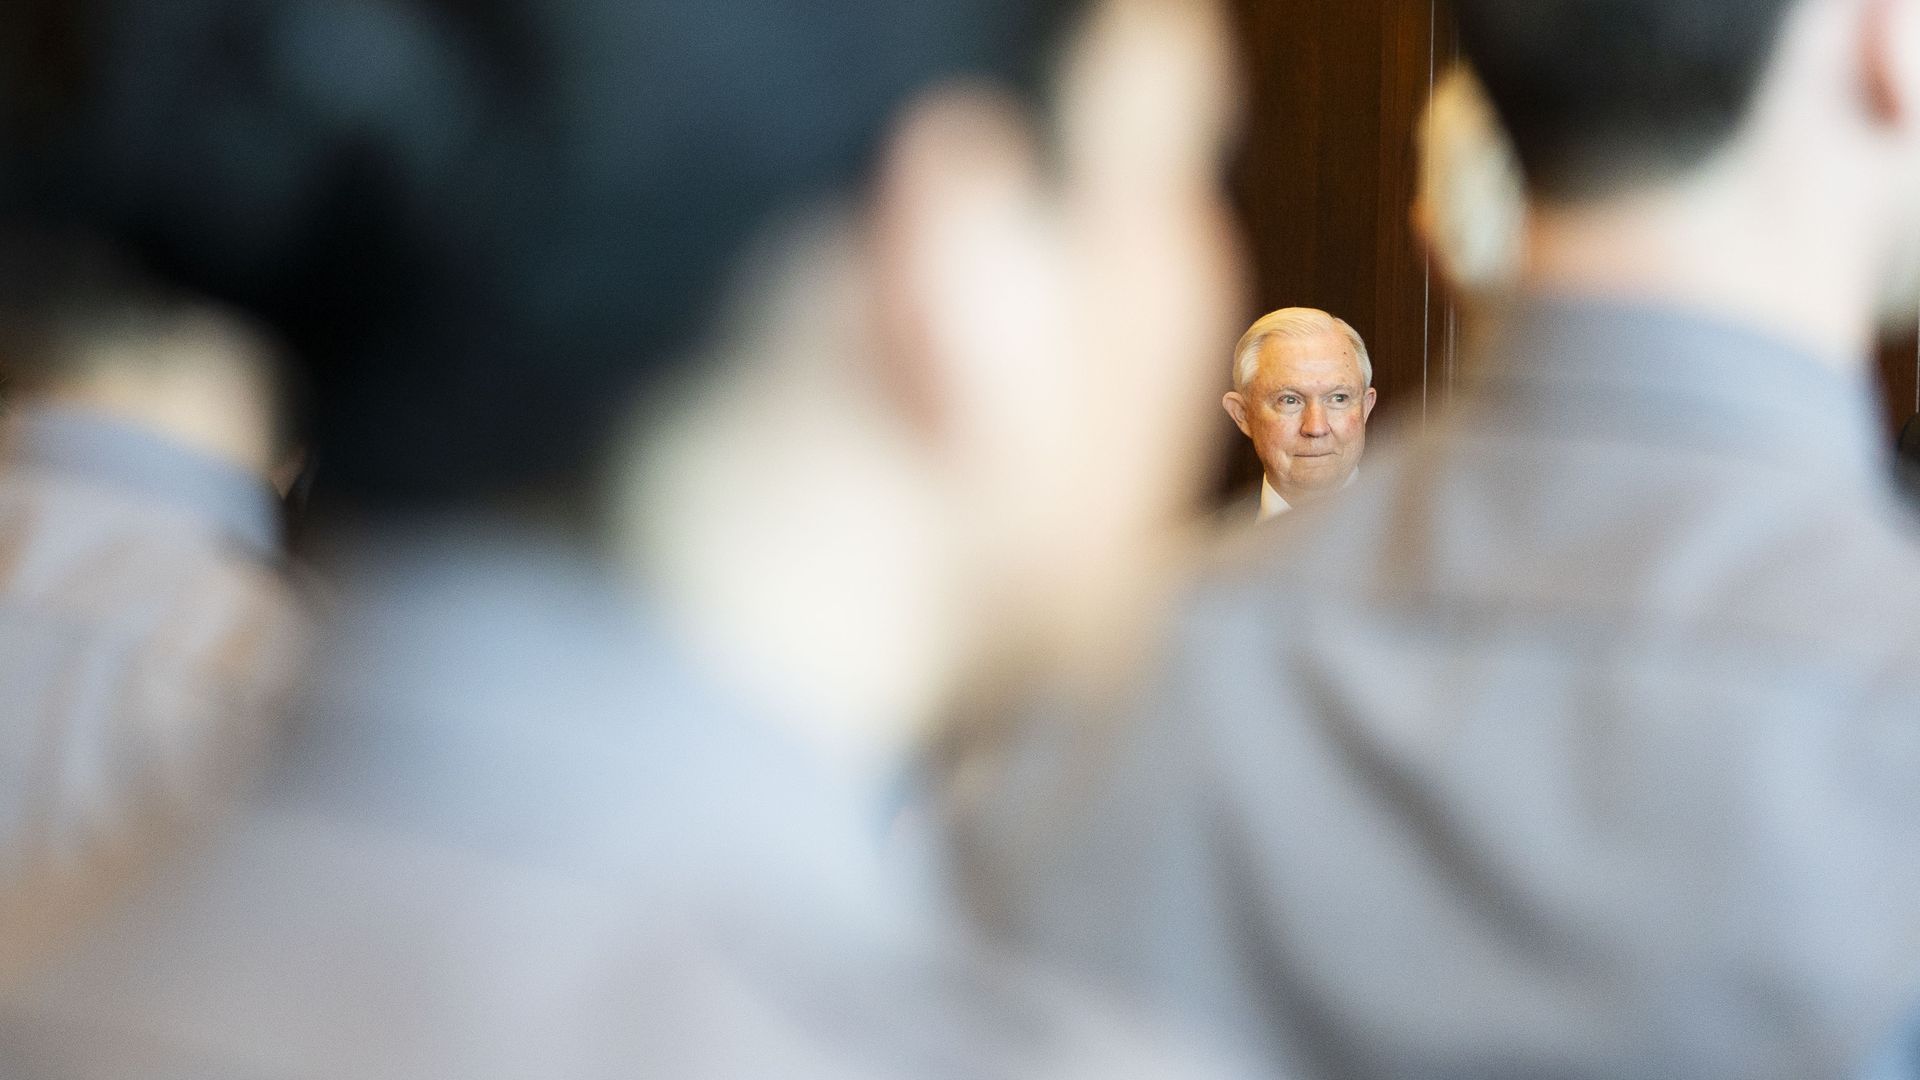 Jeff Sessions seen through a blurry foreground of men wearing grey shirts